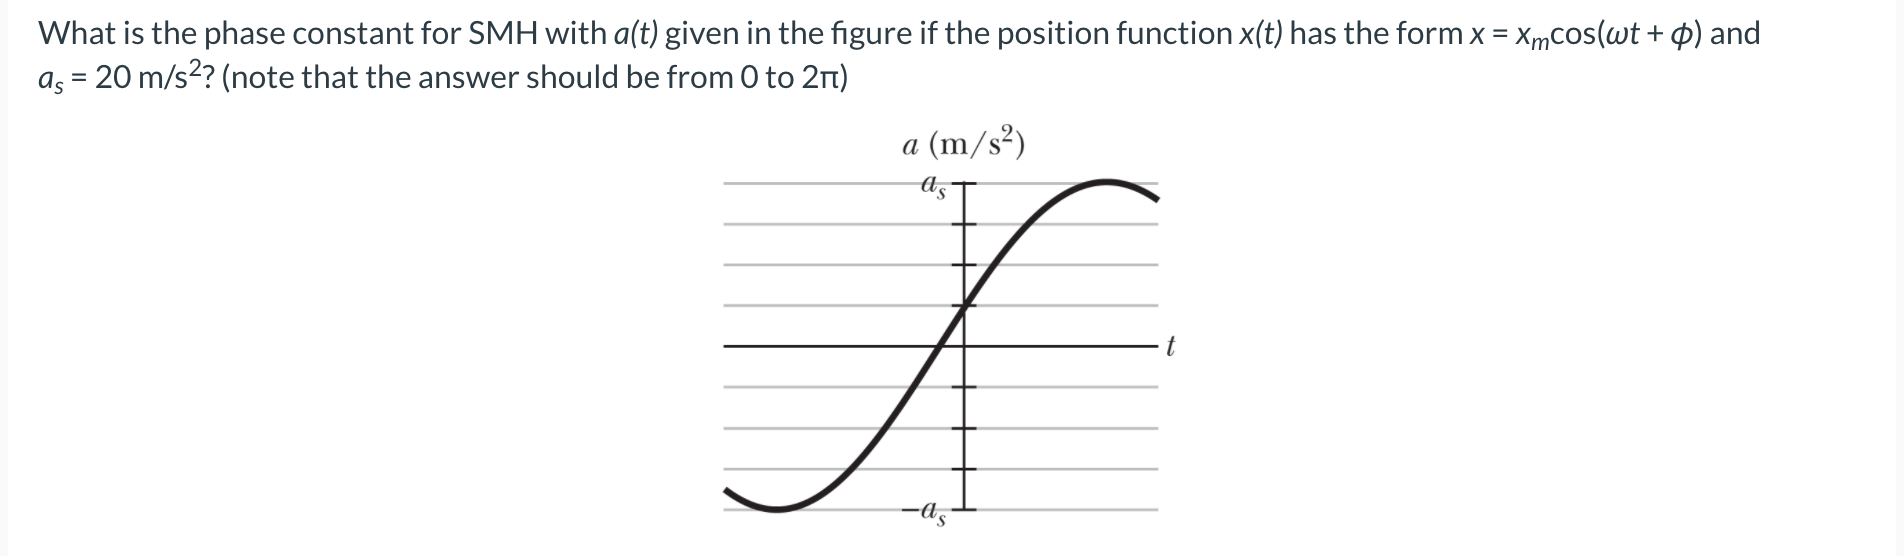 What is the phase constant for SMH with a(t) given in the figure if the position function x(t) has the form x = Xmcos(wt+Q) a